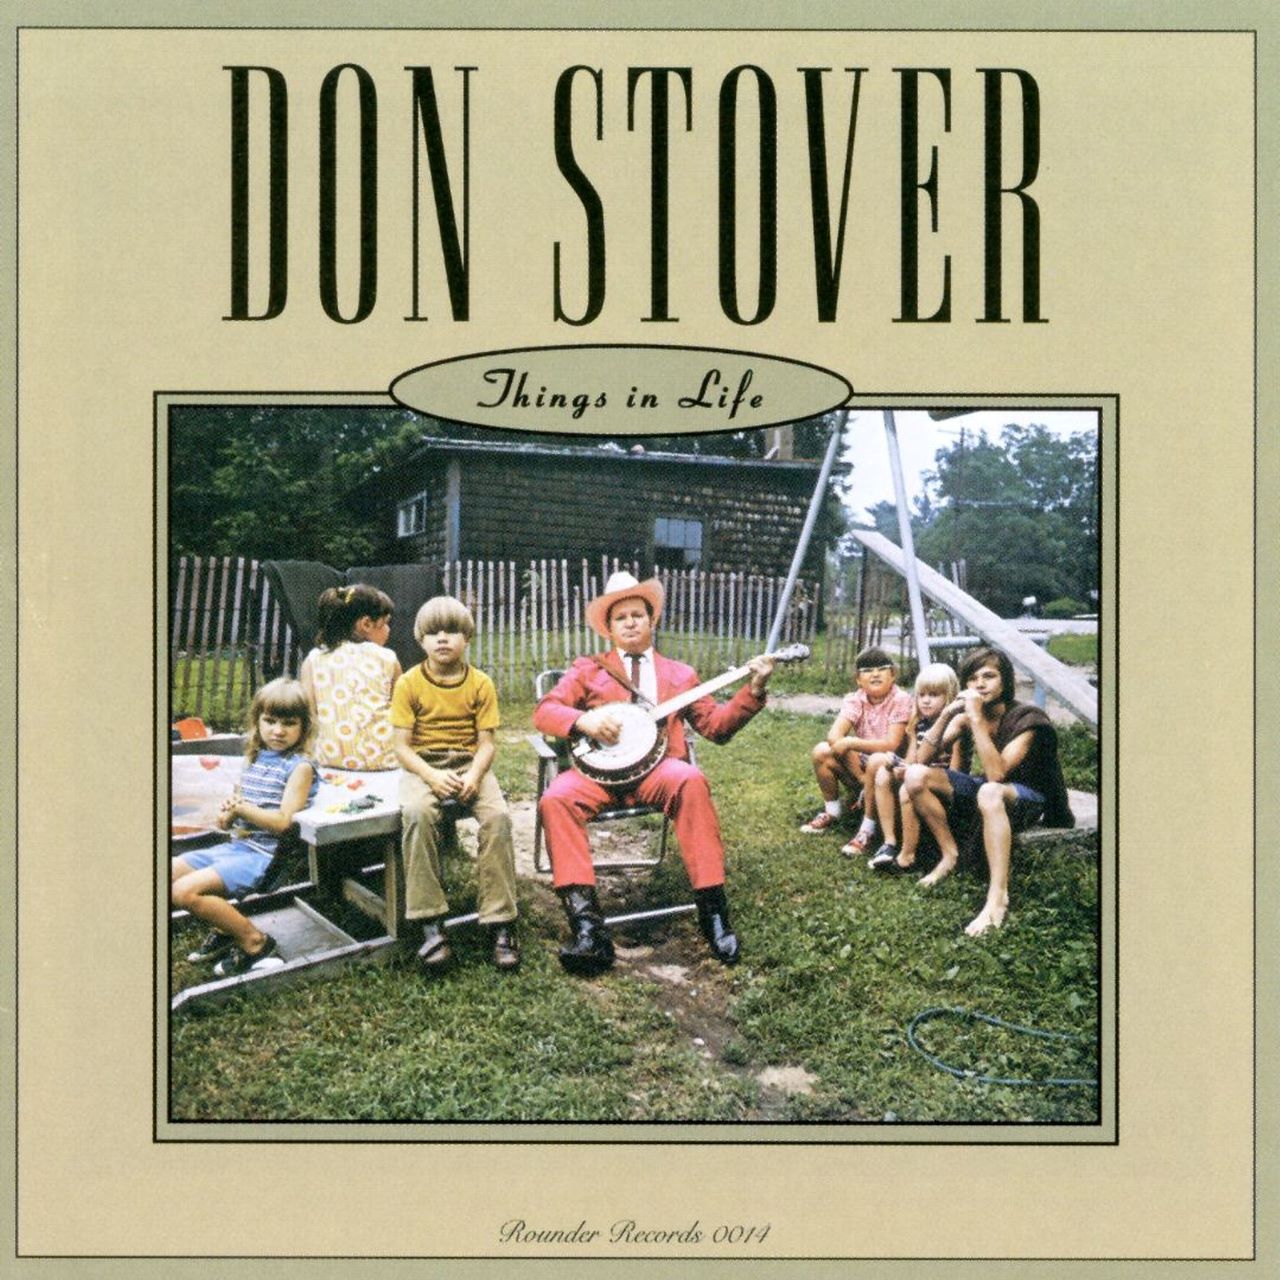 Don Stover - Things In Life cover album